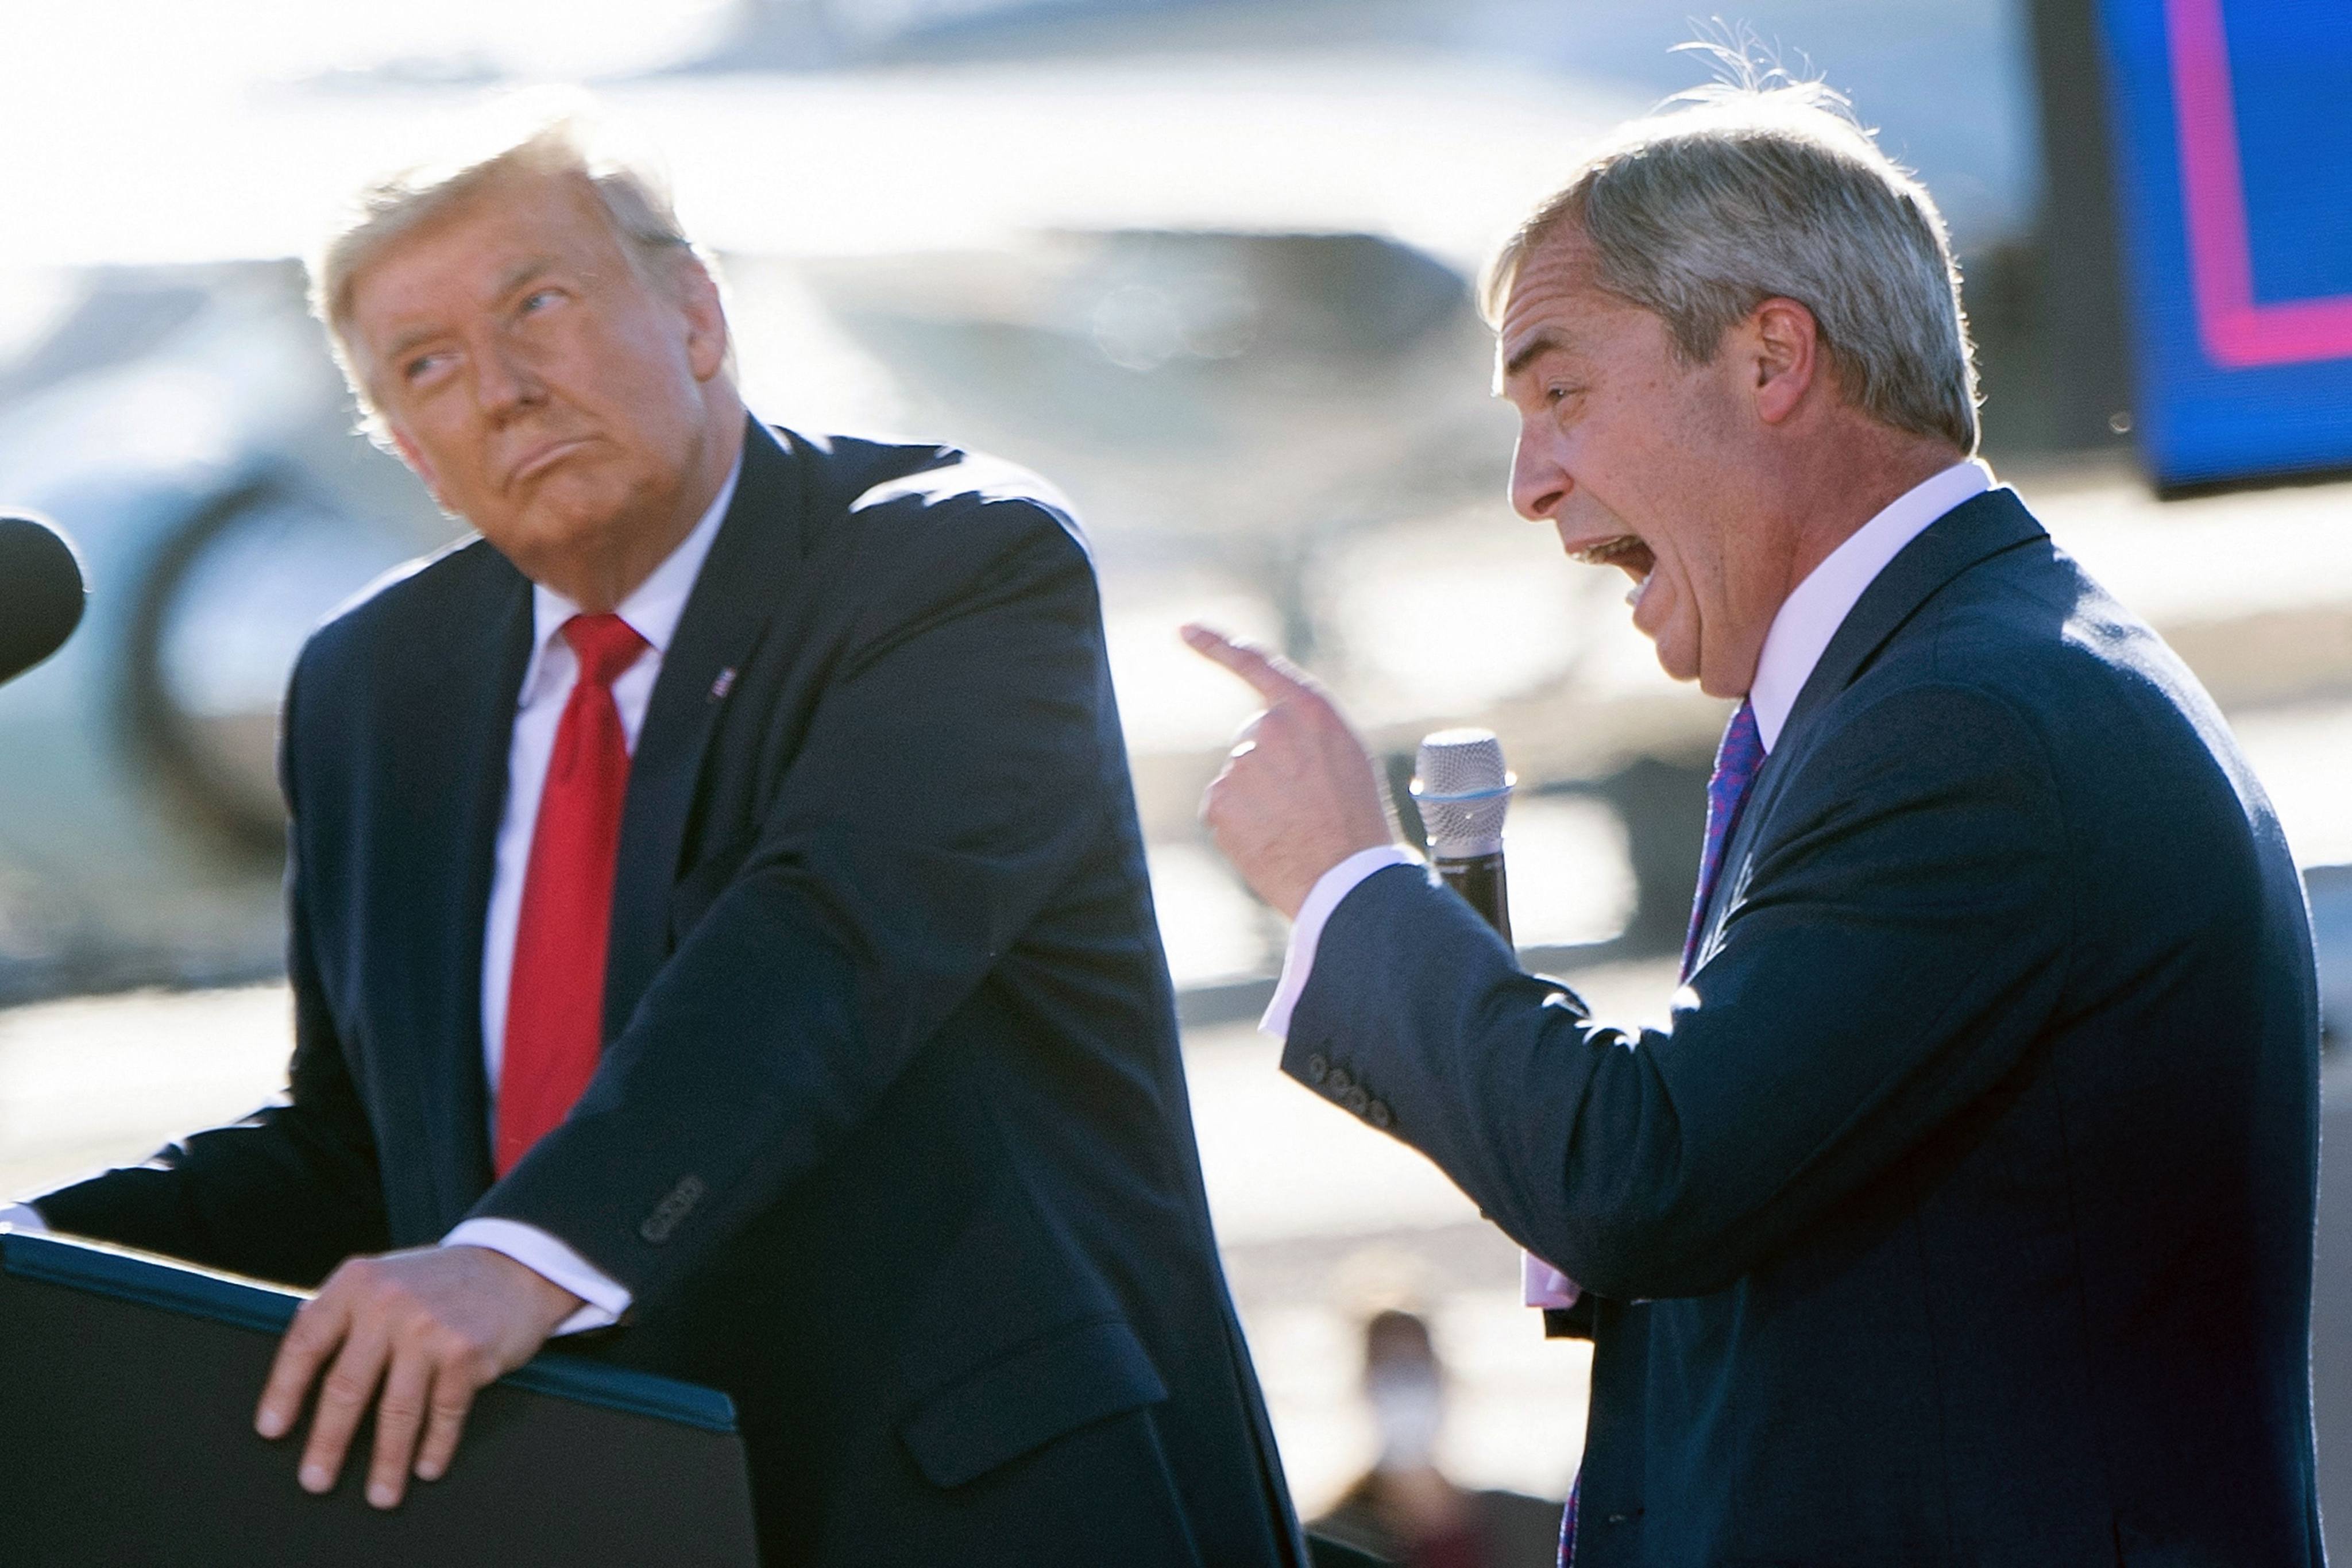 Then US President Donald Trump listens as UK politician Nigel Farage speaks during a Make America Great Again rally in Goodyear, Arizona, in October 2020. Photo: AFP